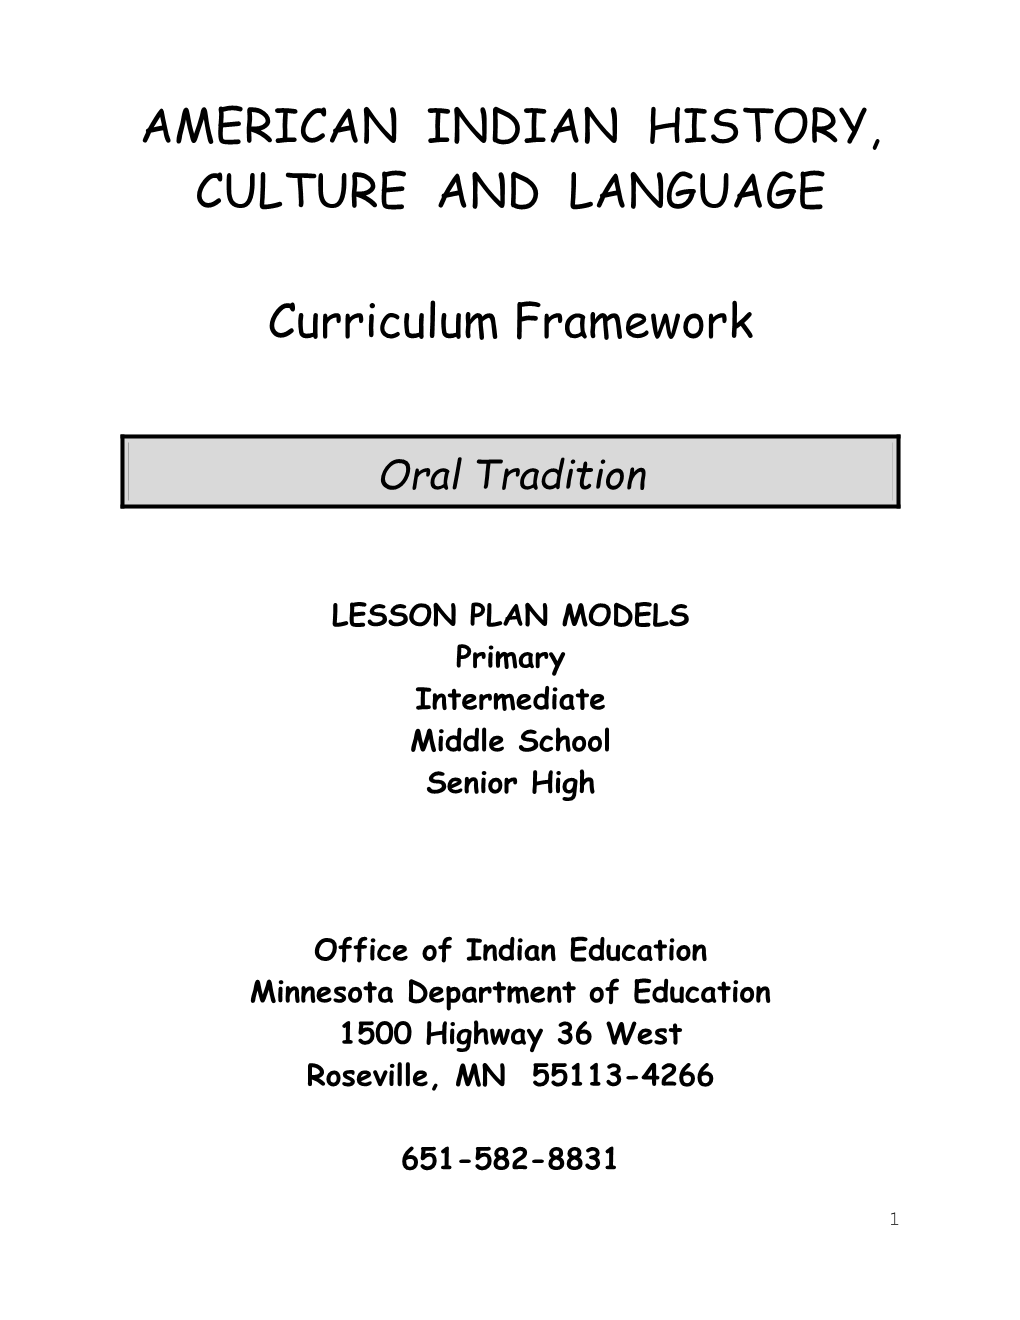 American Indian Oral Tradition